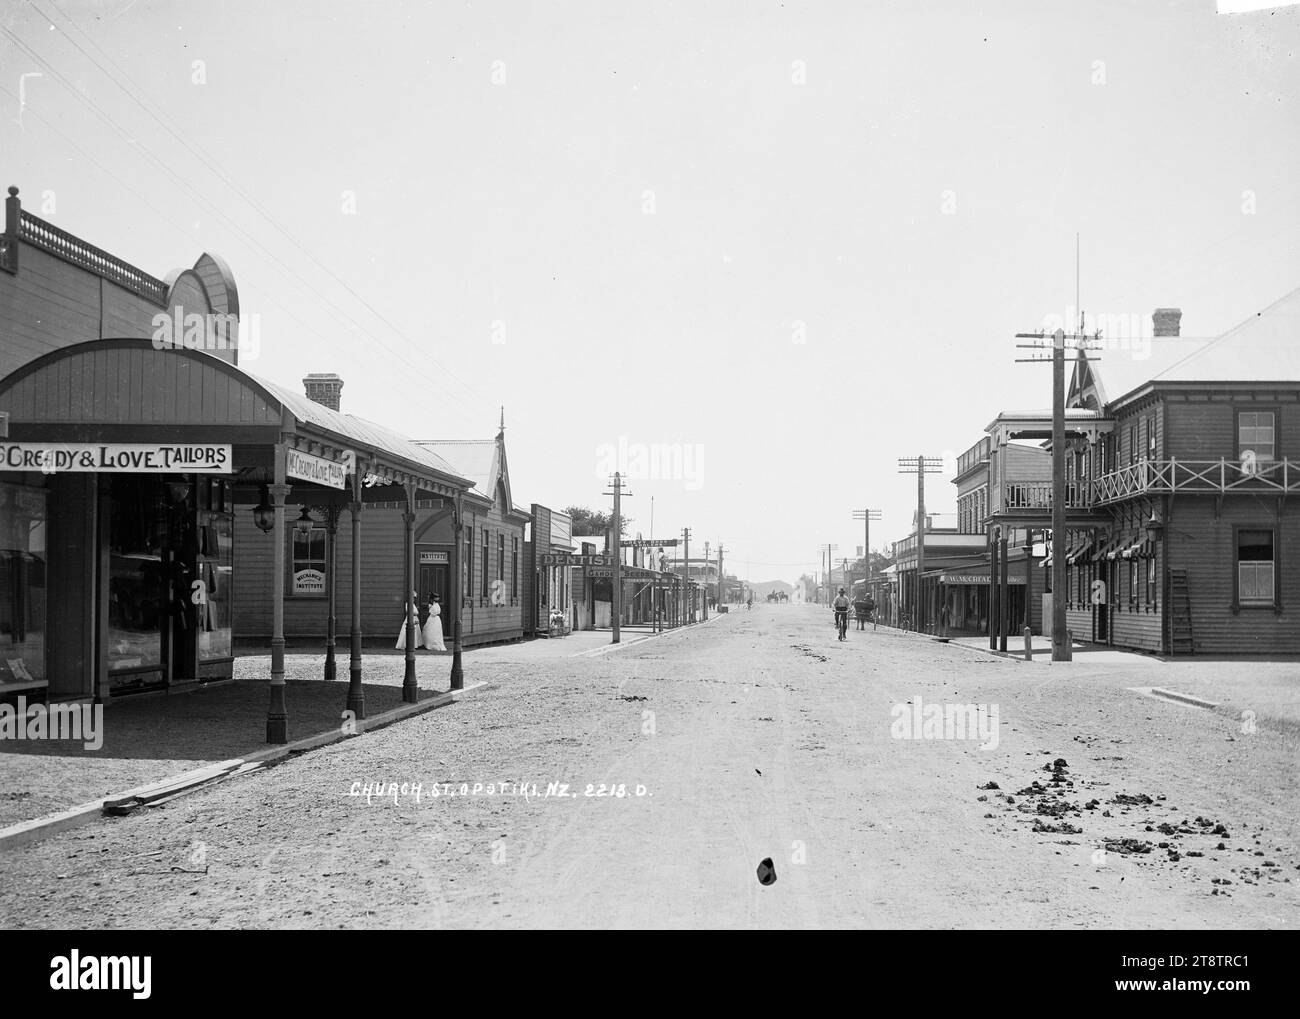 Church Street, Opotiki, View looking down Church Street (now known as Elliot Street) with the Royal Hotel on the right; McCready & Love (tailors), Mechanics Institute; dentist, saddler, and other businesses on the left. The Masonic Hotel can be seen in the far distance on the left. Two women are standing at the entrance to the Mechanics Institute; a pram is on the footpath outside the dentist; a cyclist is heading towards the photographer and horseriders can be seen in the far distance. in early 1900s Stock Photo